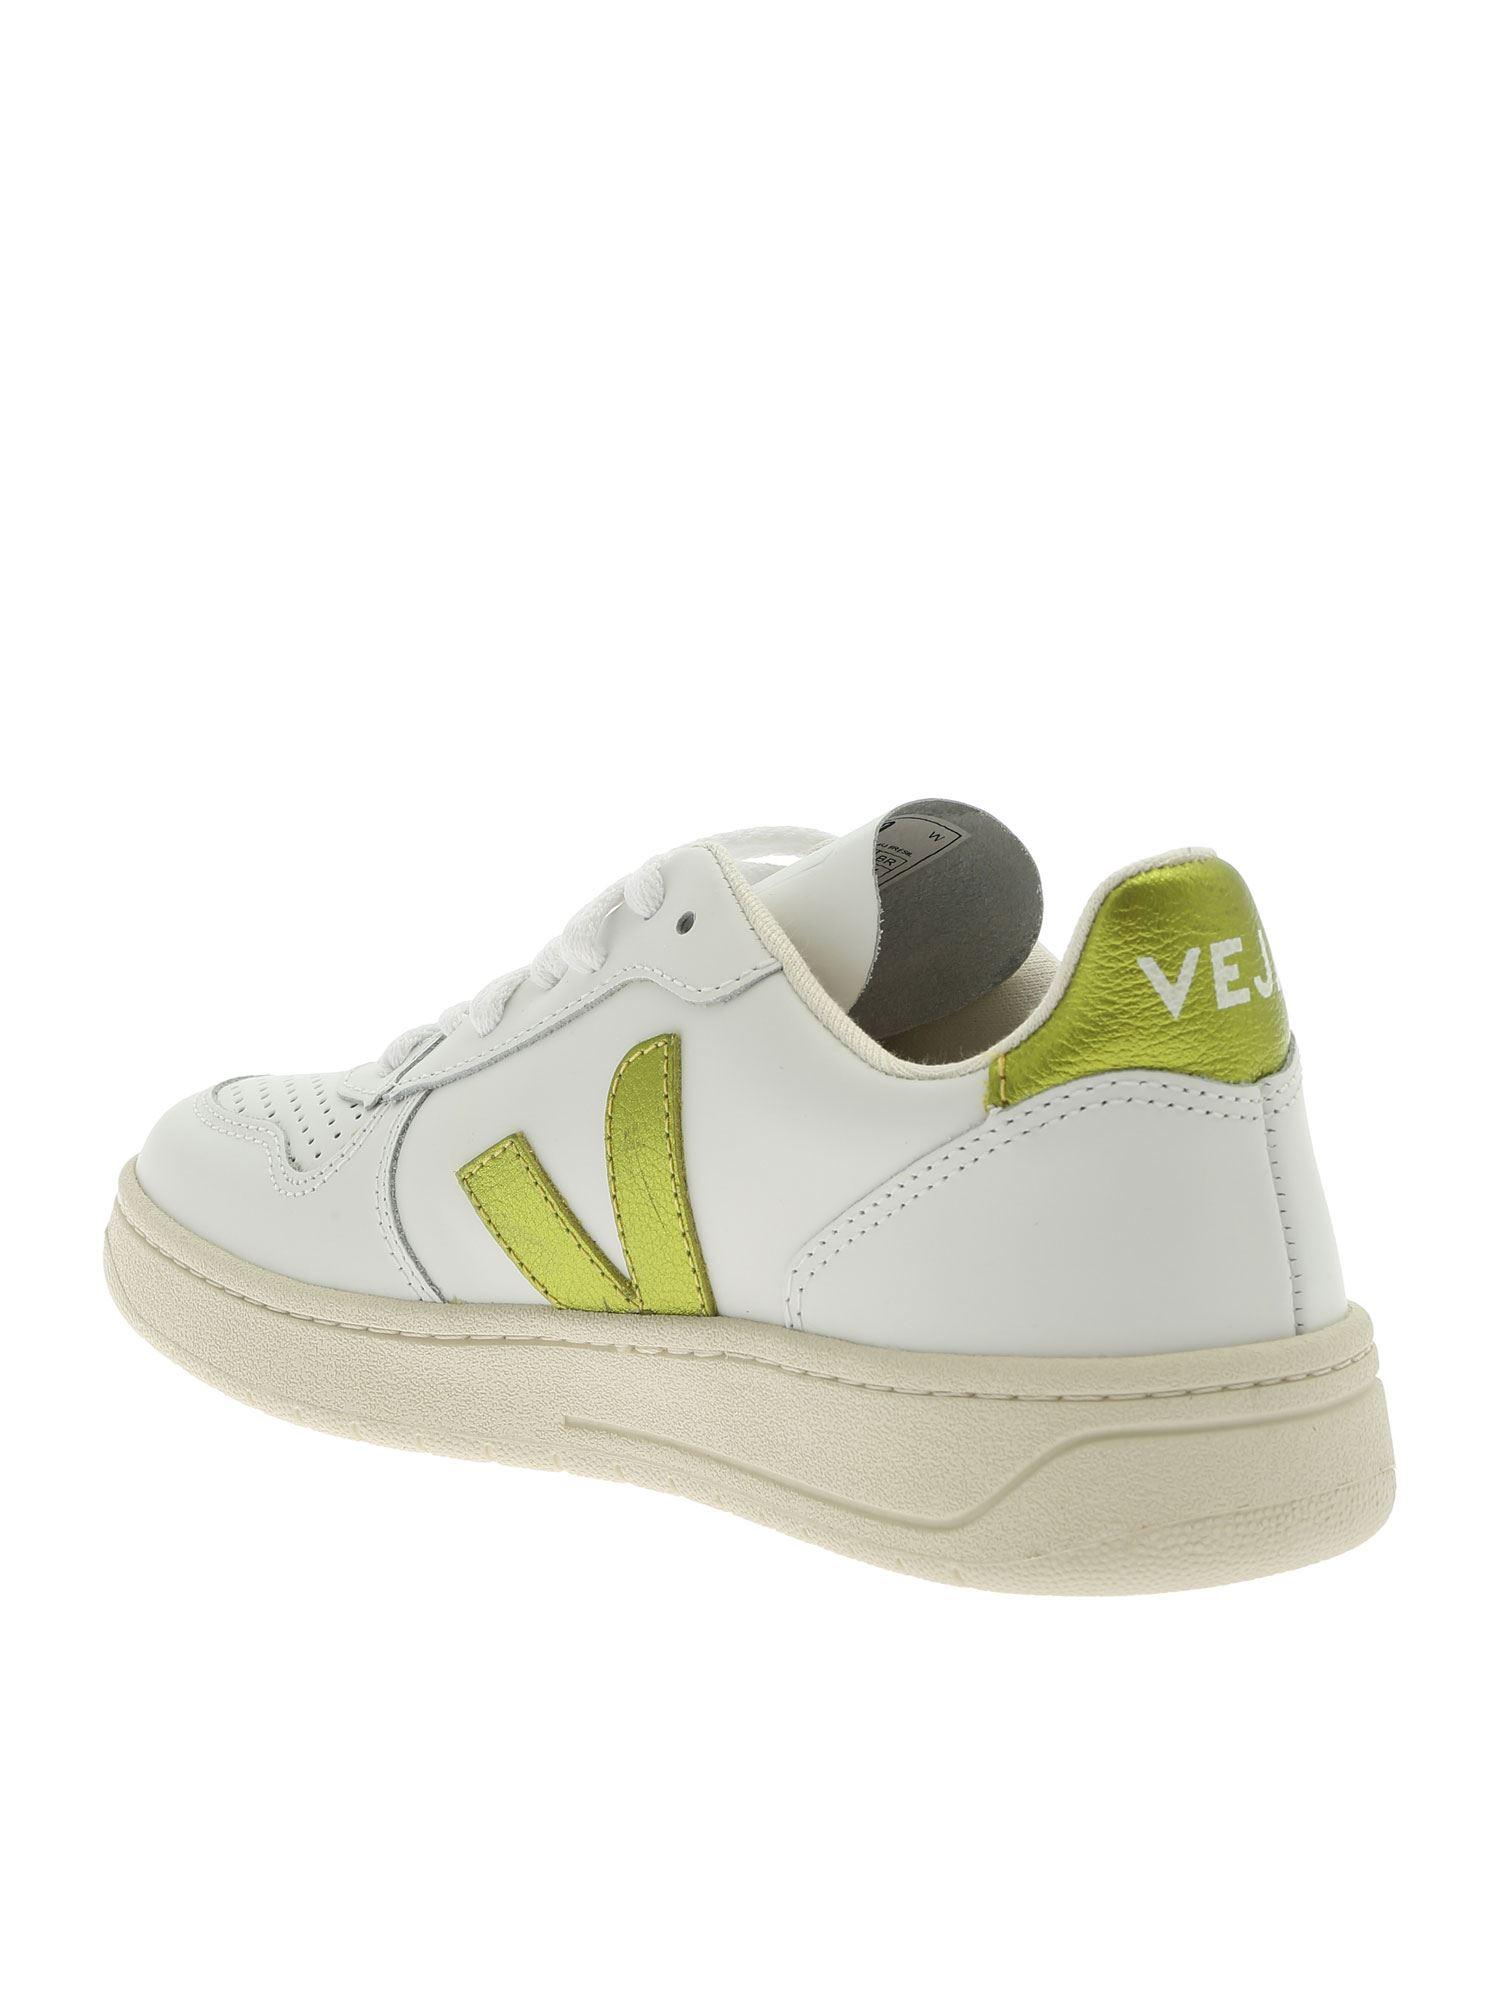 Veja Leather White And Lime-colored 